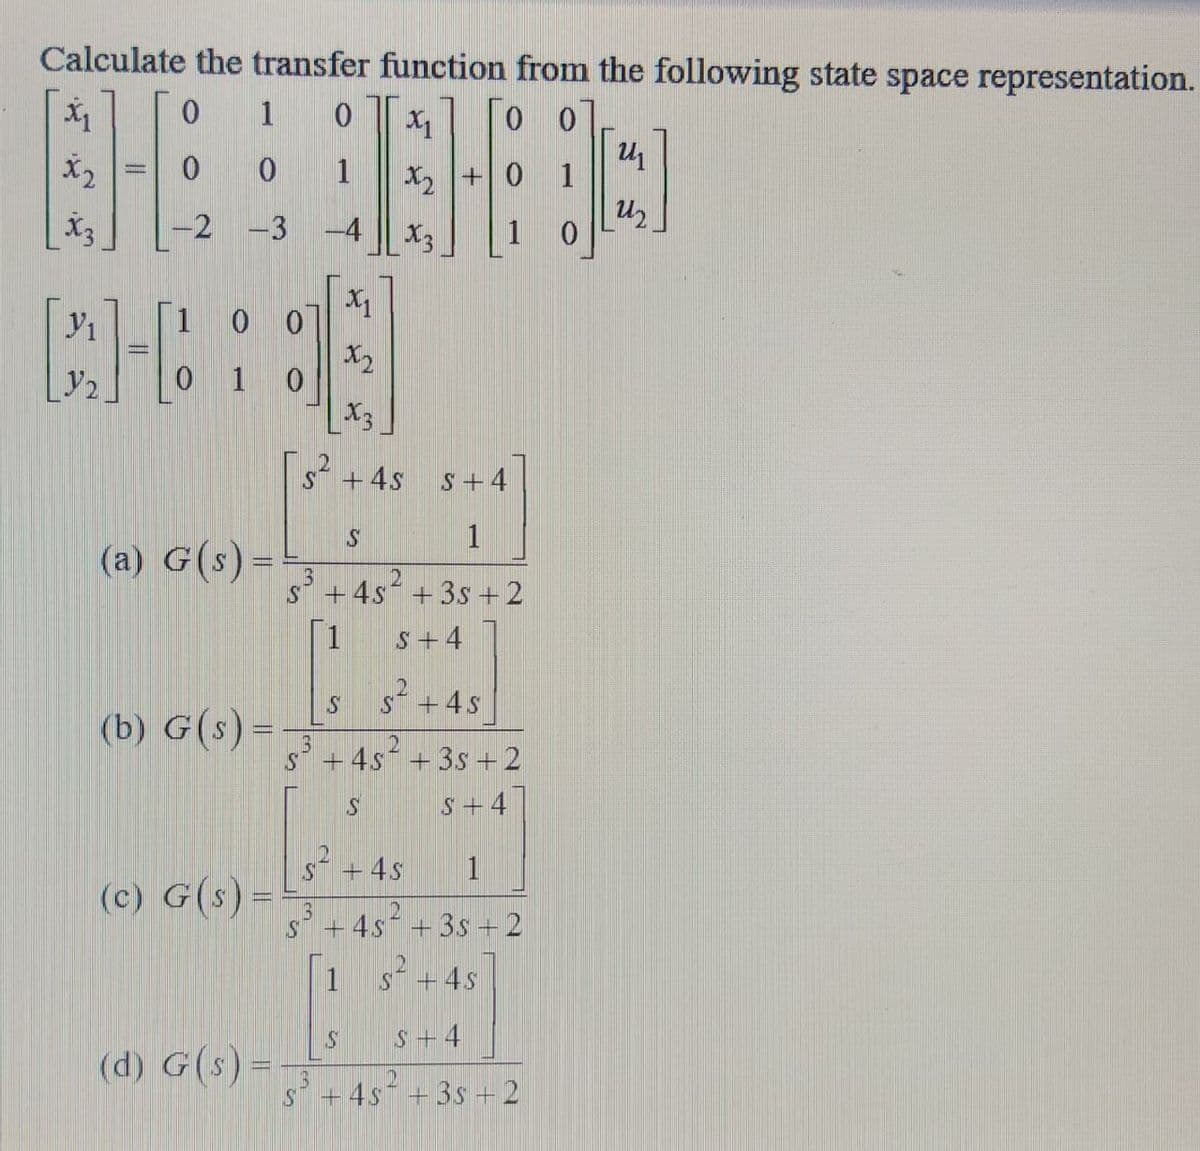 Calculate the transfer function from the following state space representation.
EHE
X1
0.
1
X2
0 0
1
X2 +0 1
-2
-3
-4
X3
[1 0 0]
X2
1
X3
s+4s
S+4
1
(a) G(s) =
+4s + 3s +2
1
S + 4
s +4s
(b) G(s)=
+ 4s* + 3s +2
S+ 4
S* +4s
1
(c) G(s) =
s +4s²
+ 3s +2
1 s+4s
S+4
(d) G(s) =
+ 4s + 3s + 2
